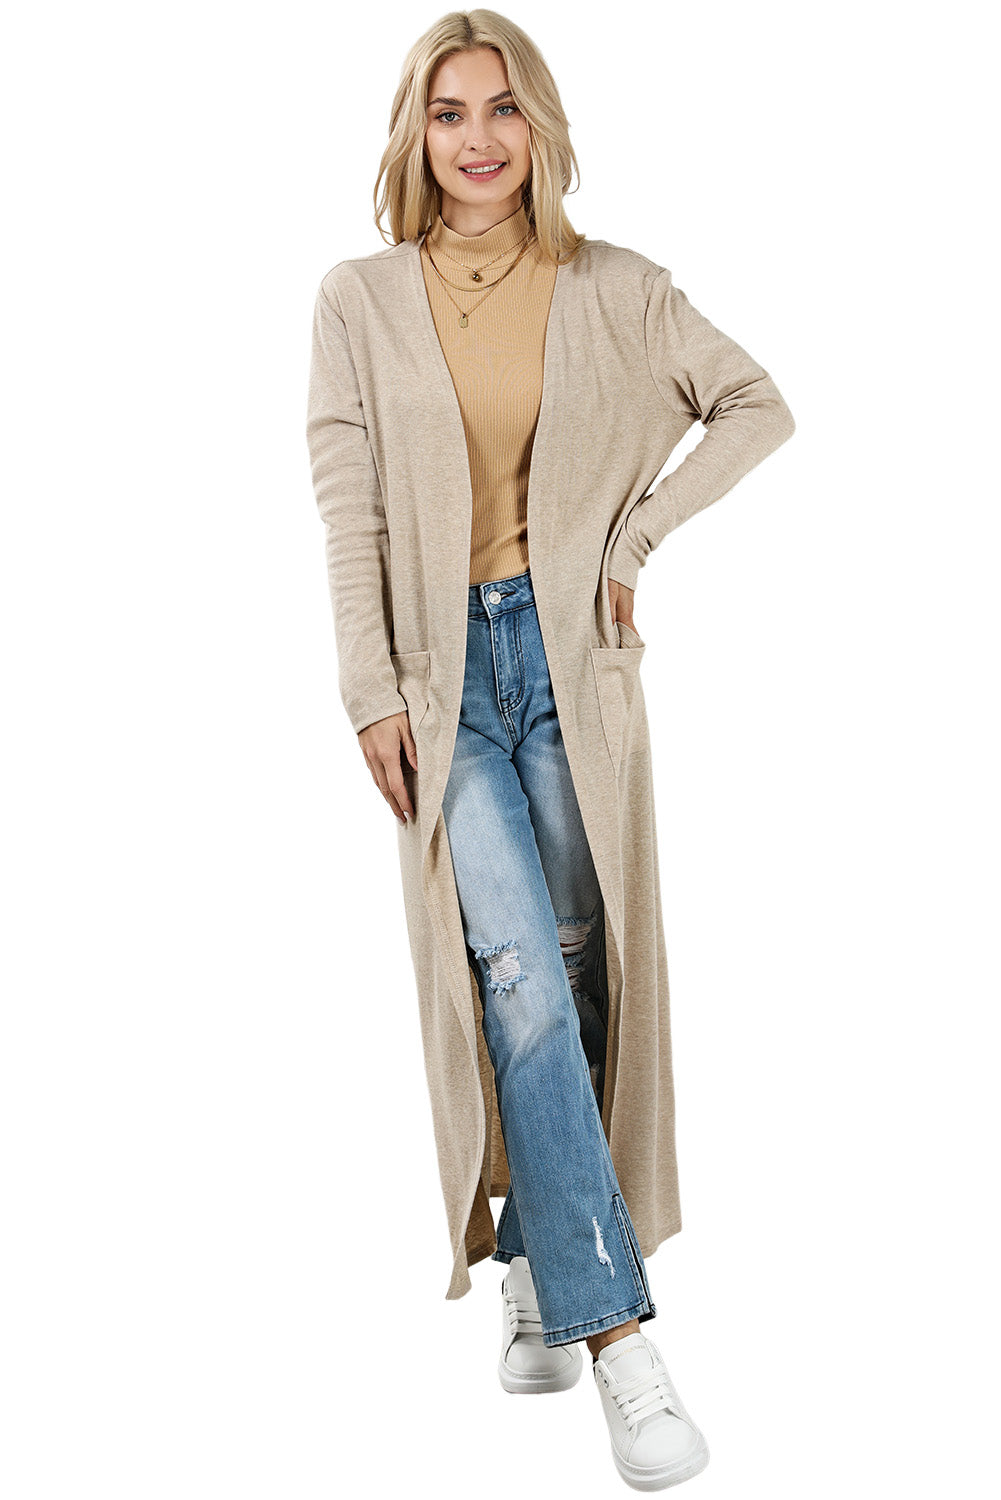 Apricot Open Front Pocketed Duster Cardigan with Slits